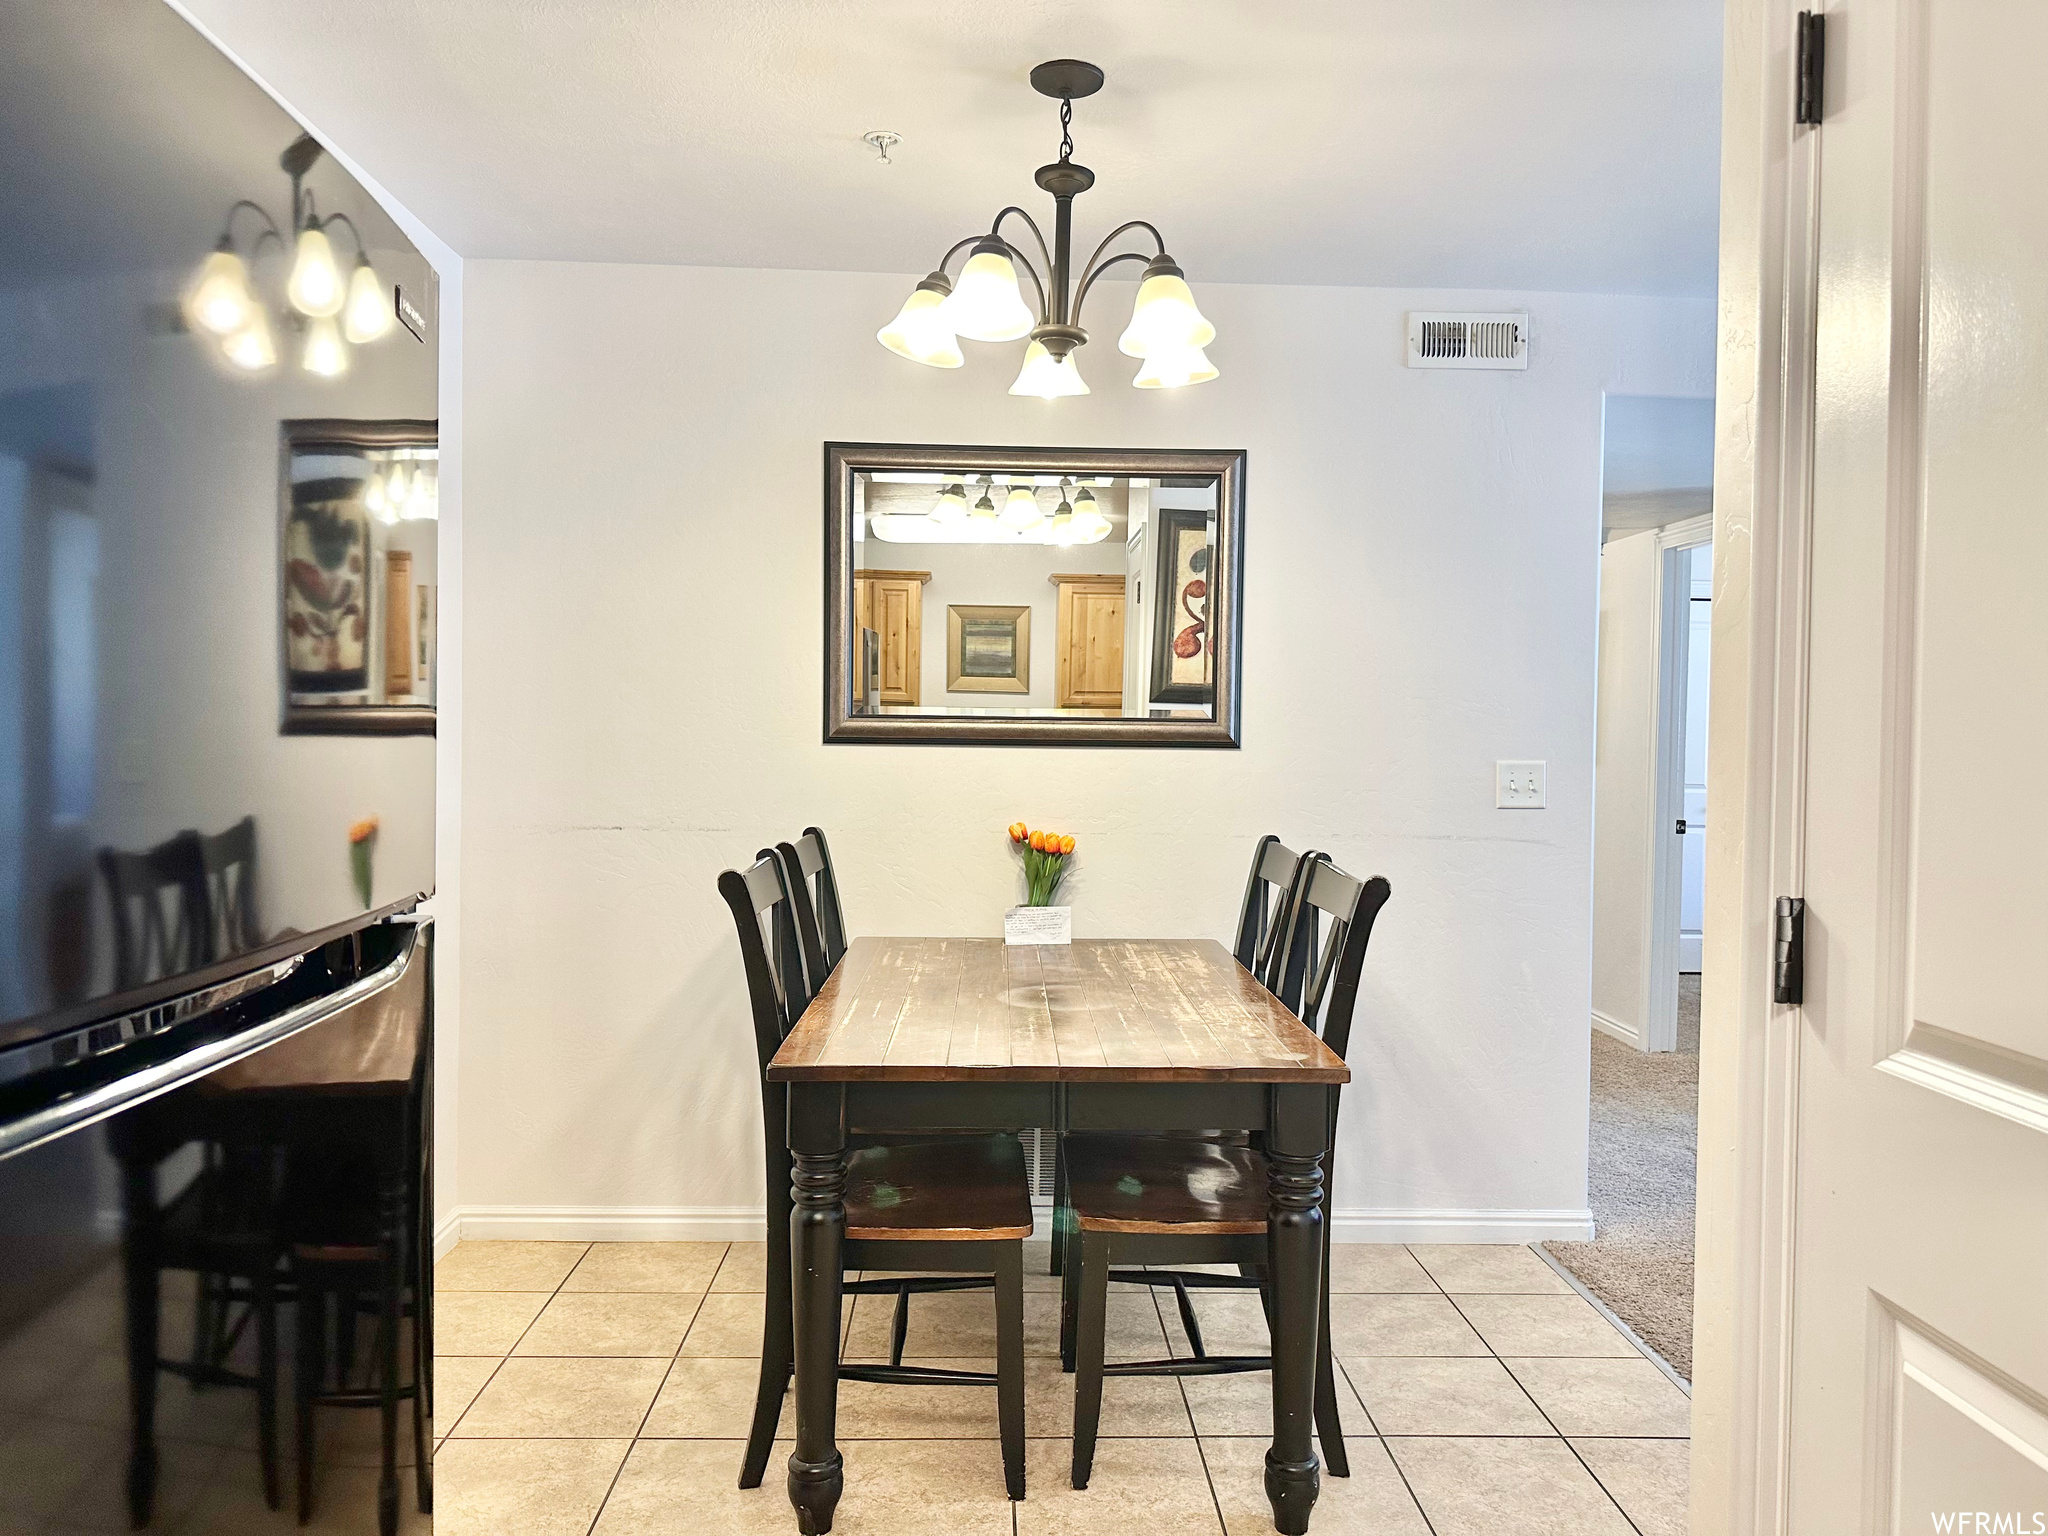 Dining space featuring an inviting chandelier and light tile floors